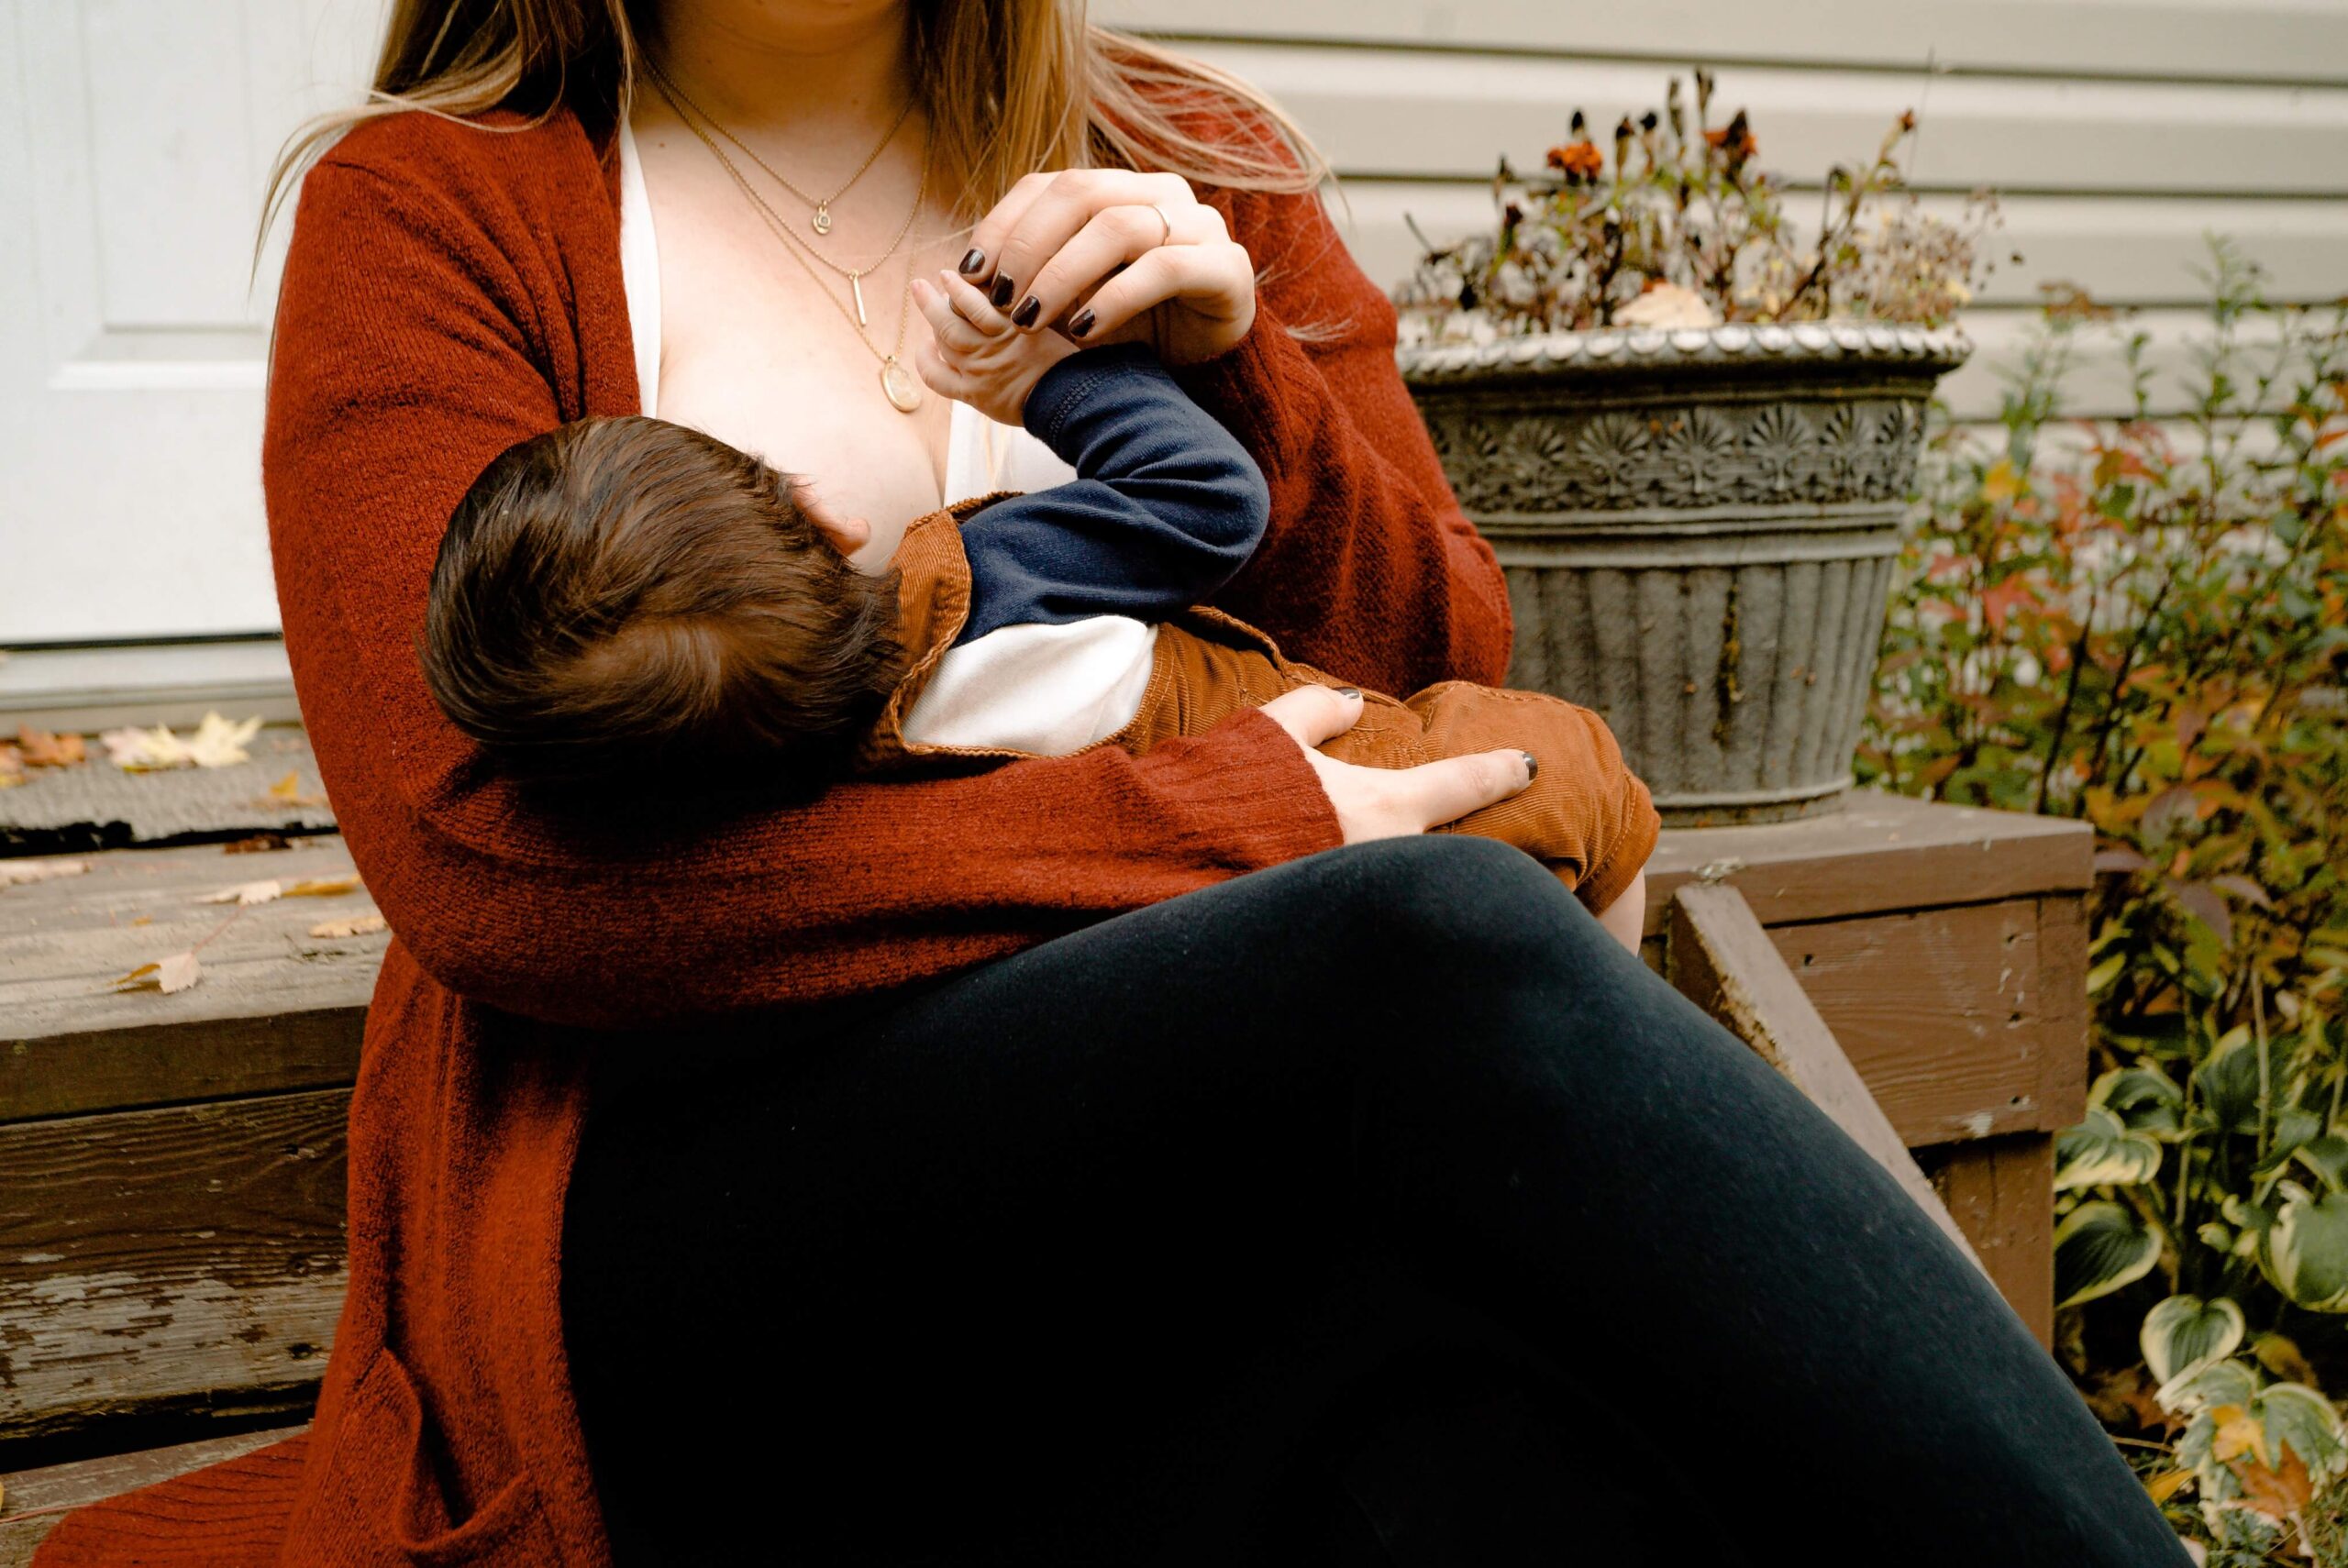 How to wean the baby away from breastfeeding? 